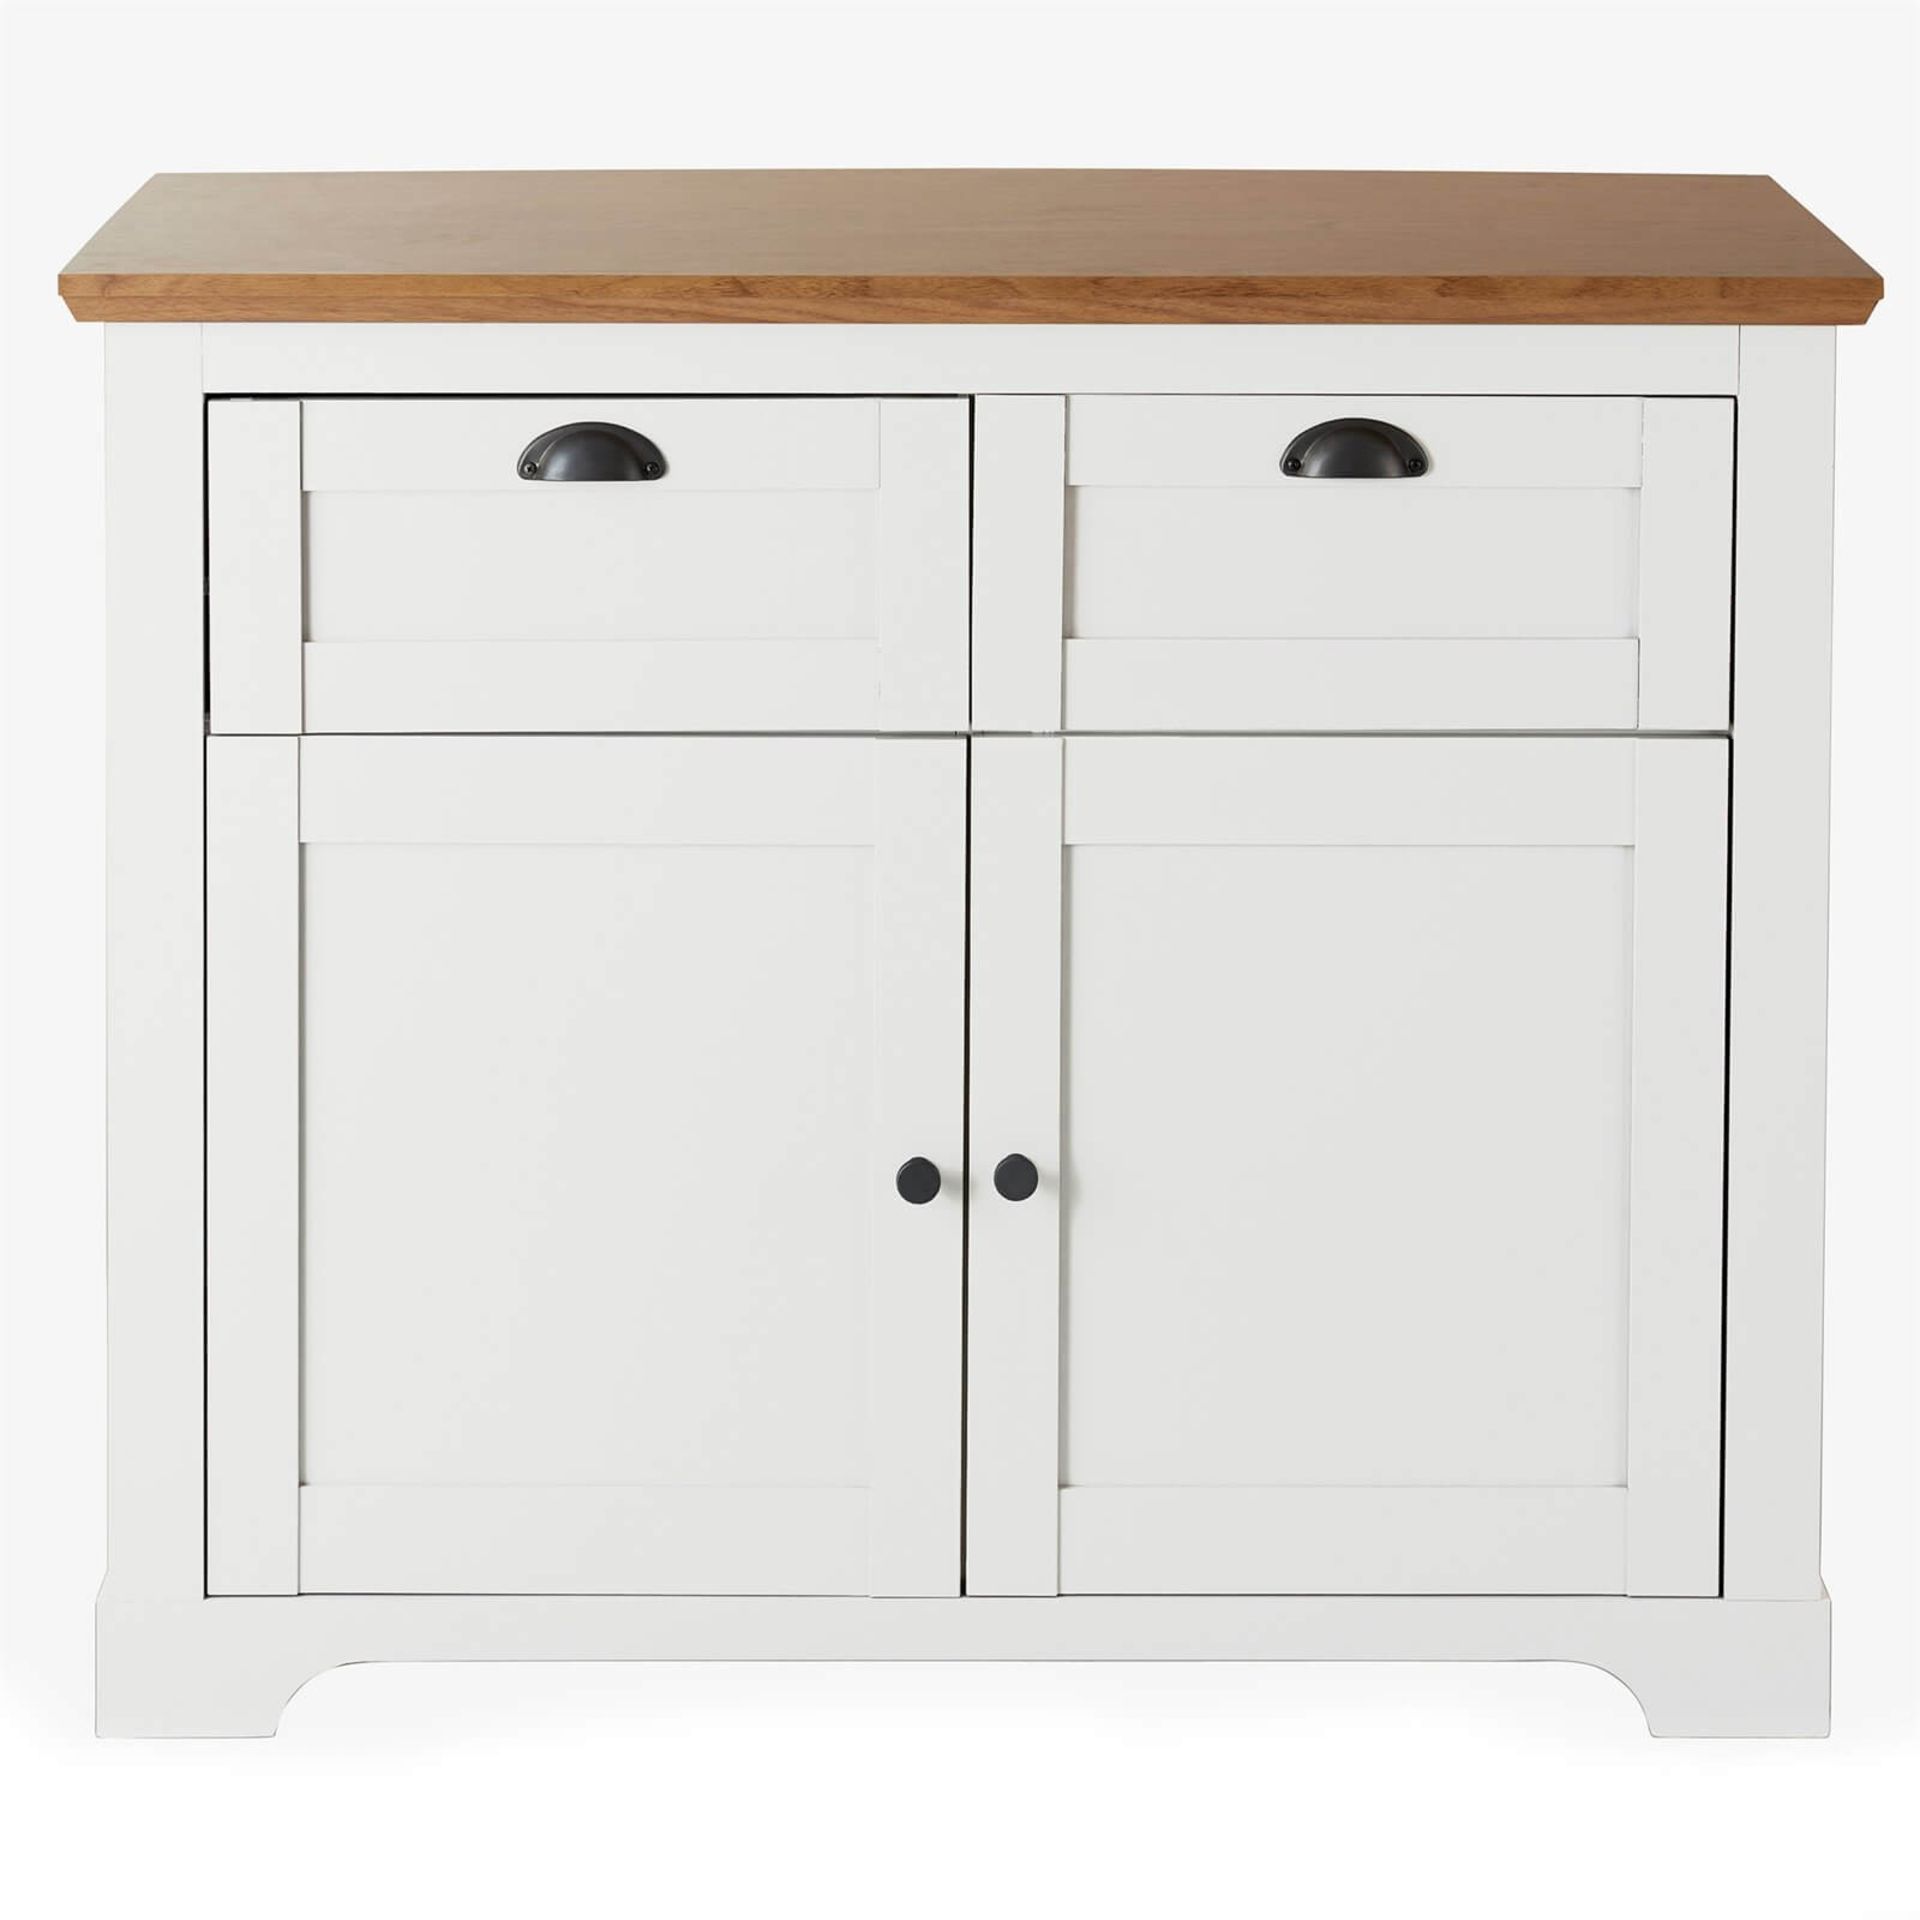 (R7I) 1 X Diva Compact Sideboard Ivory. Ivory Finish With Oak Effect Top. Two Drawers And Two Compa